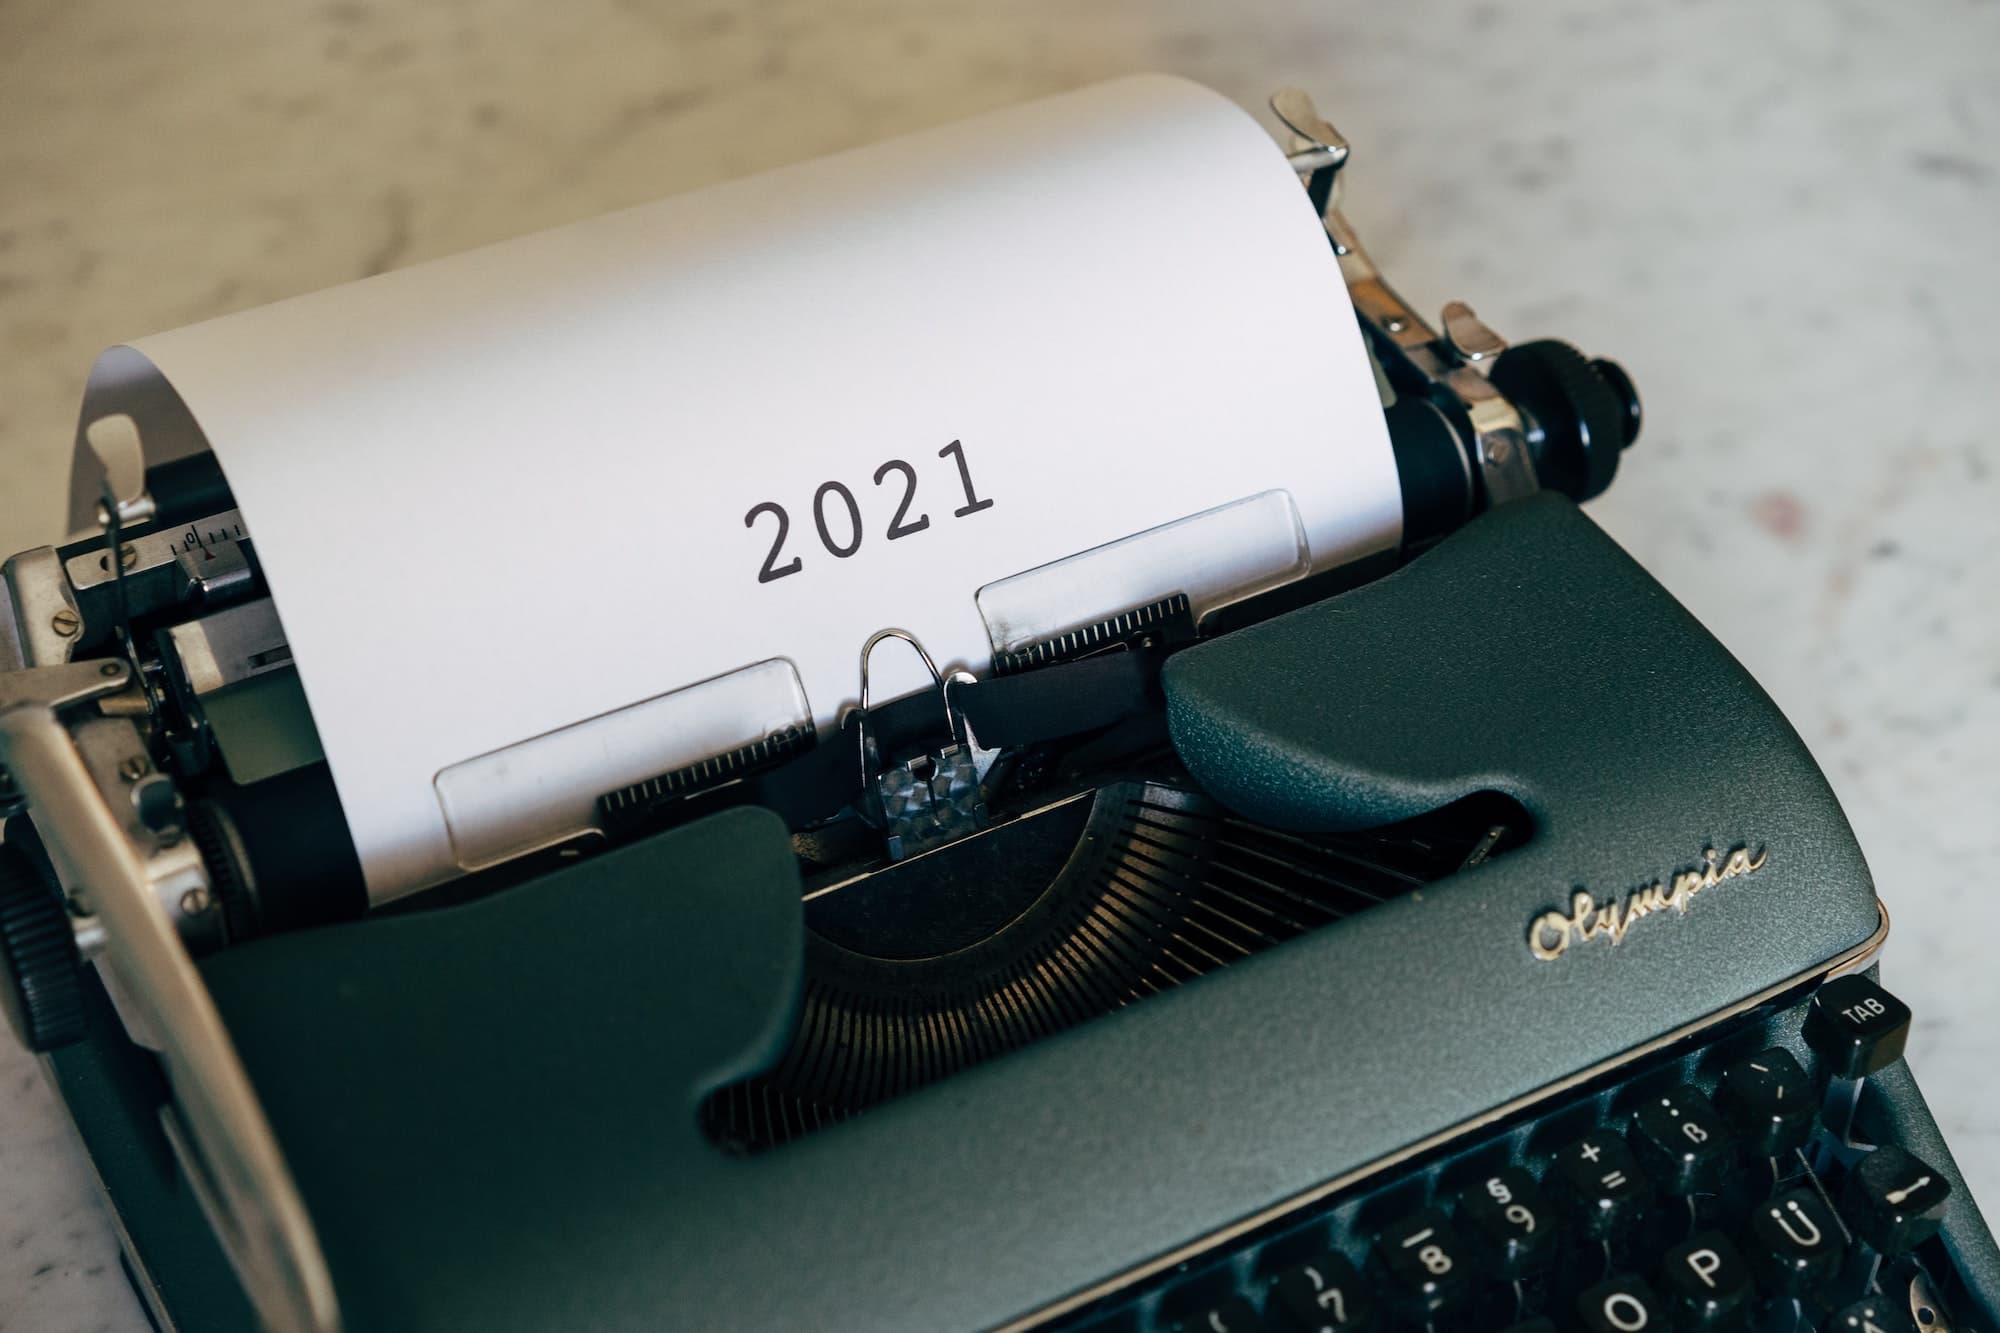 Typewriter with the words 2021 typed out on paper